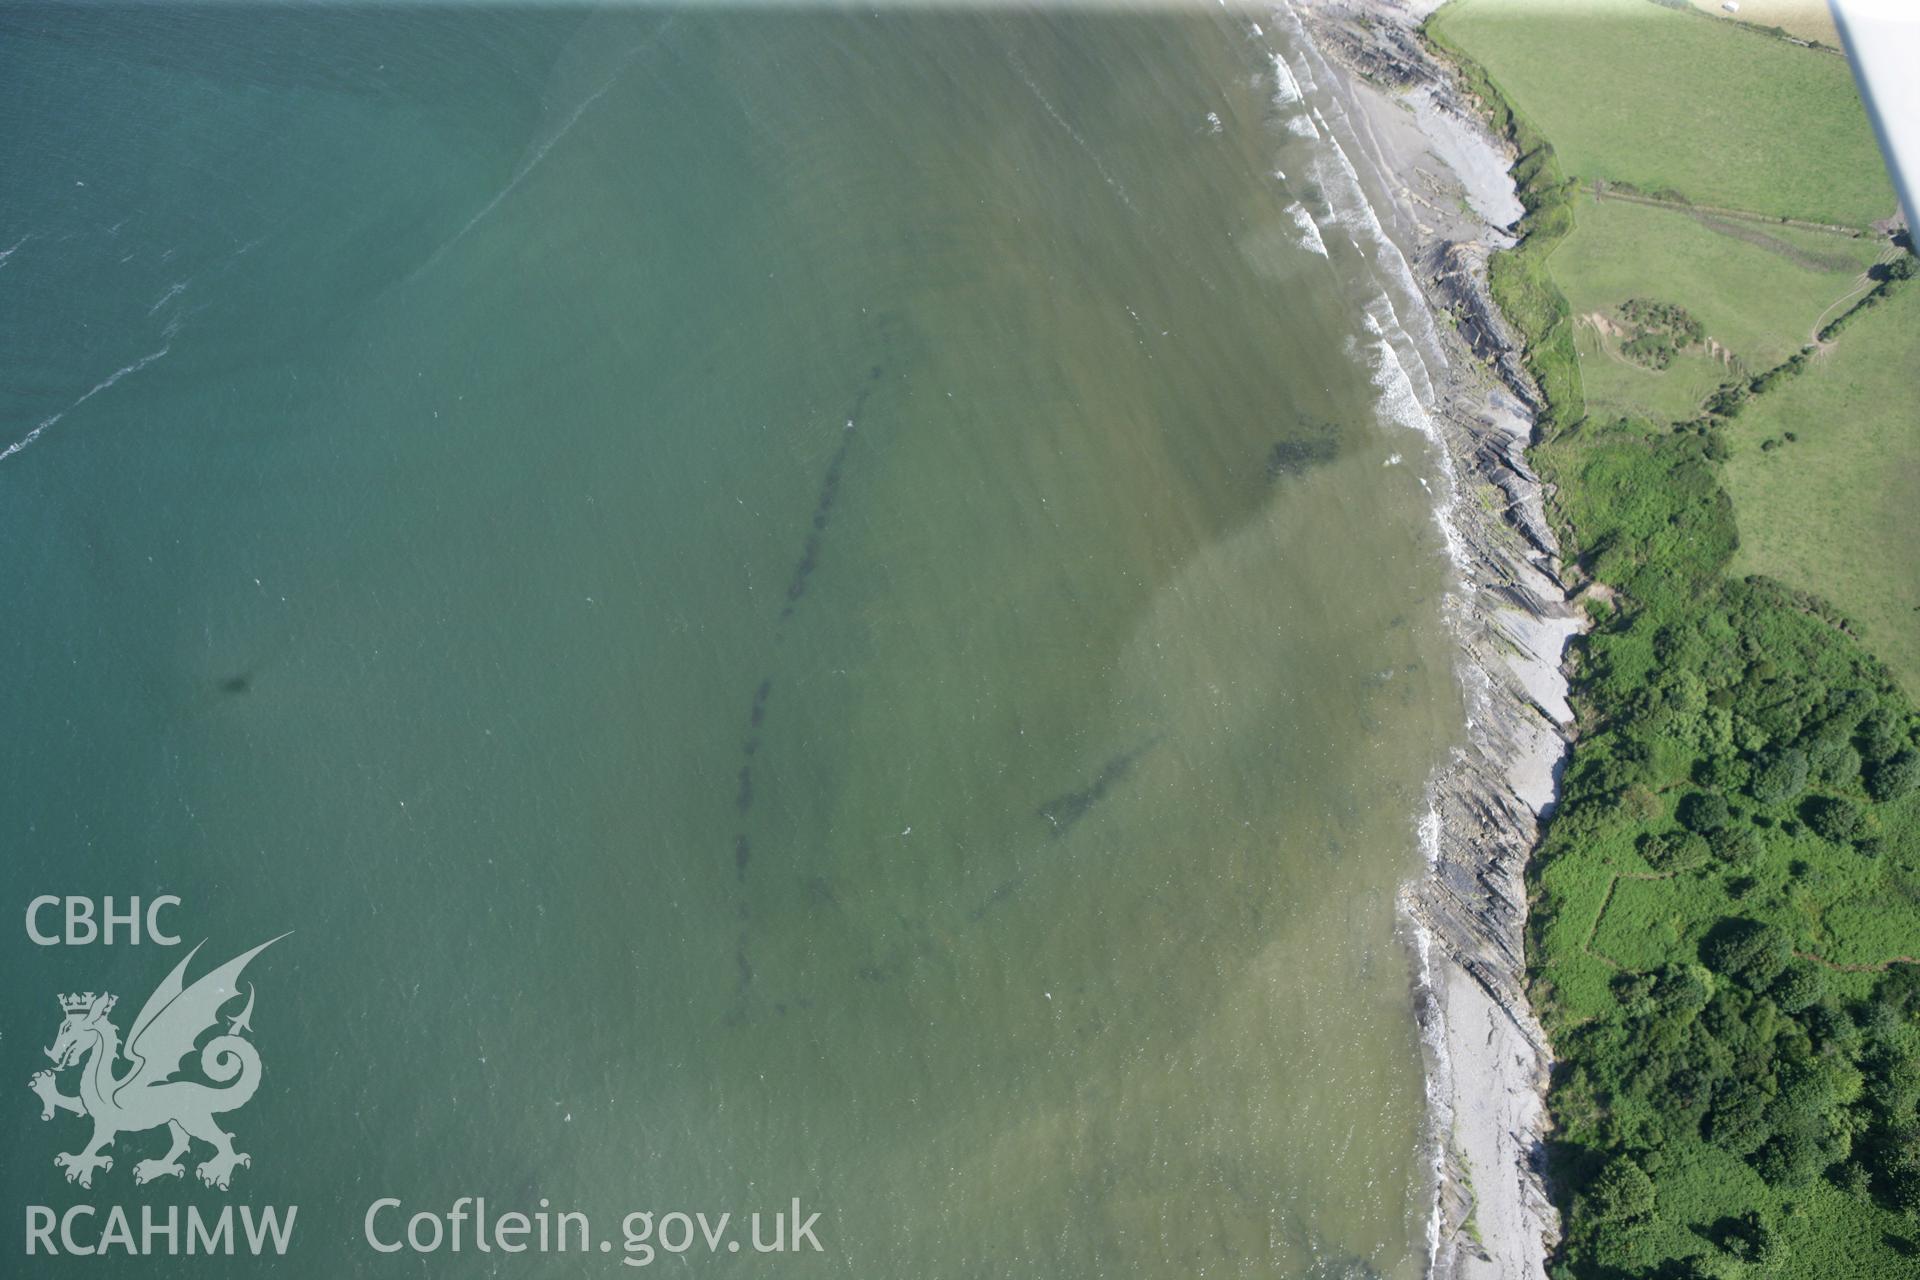 RCAHMW colour oblique photograph of Poppit fish trap. Taken by Toby Driver and Oliver Davies on 28/06/2011.